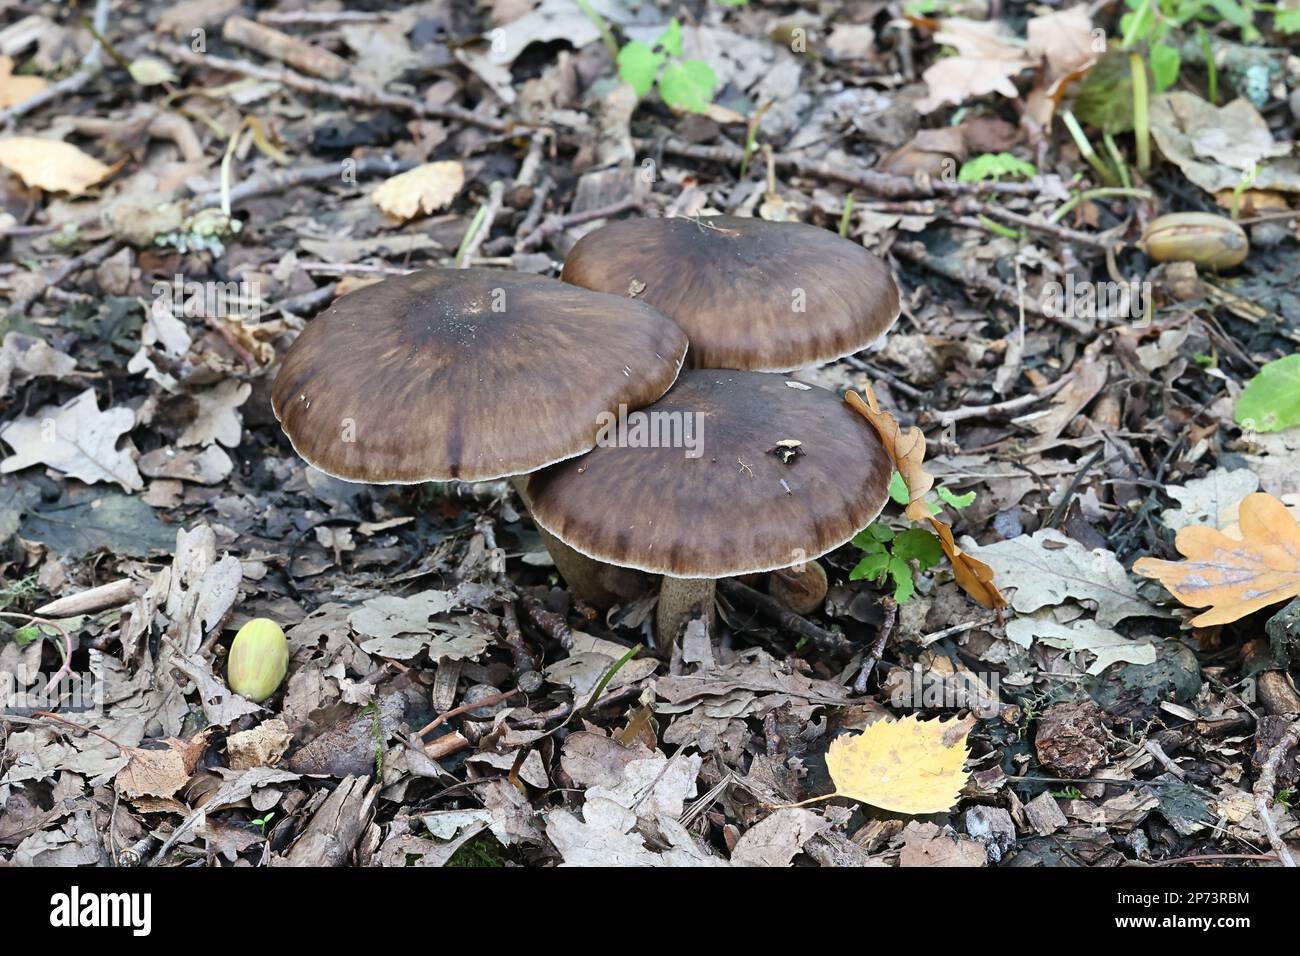 Pluteus rangifer, previously Pluteus cervinus coll., a shield mushroom from Finland, no common English name Stock Photo